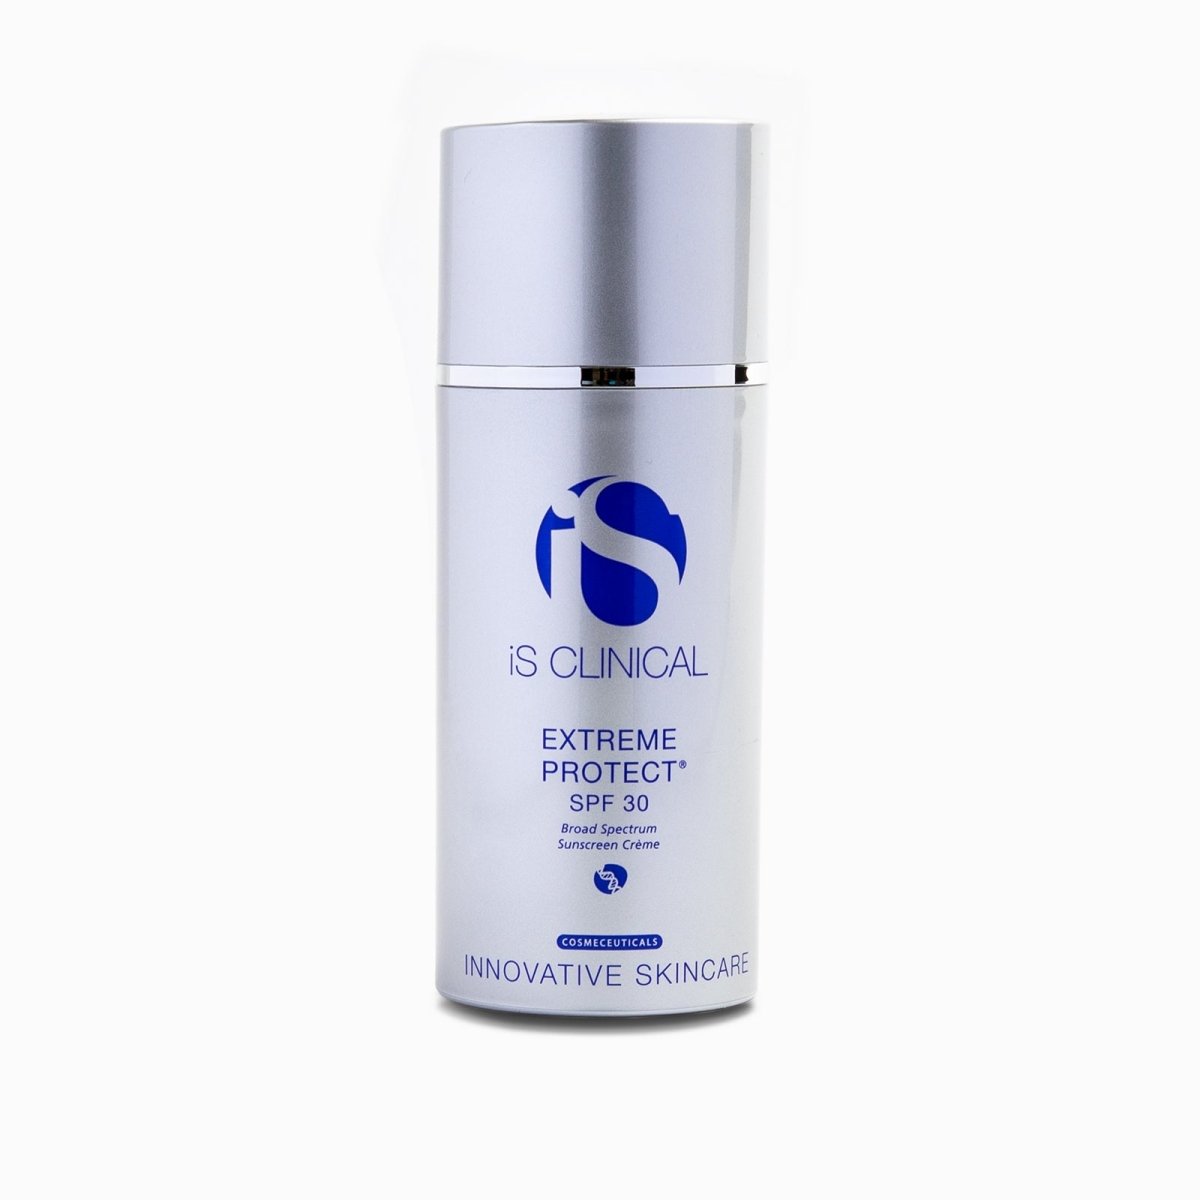 iS Clinical Extreme Protect SPF 30 - SkincareEssentials